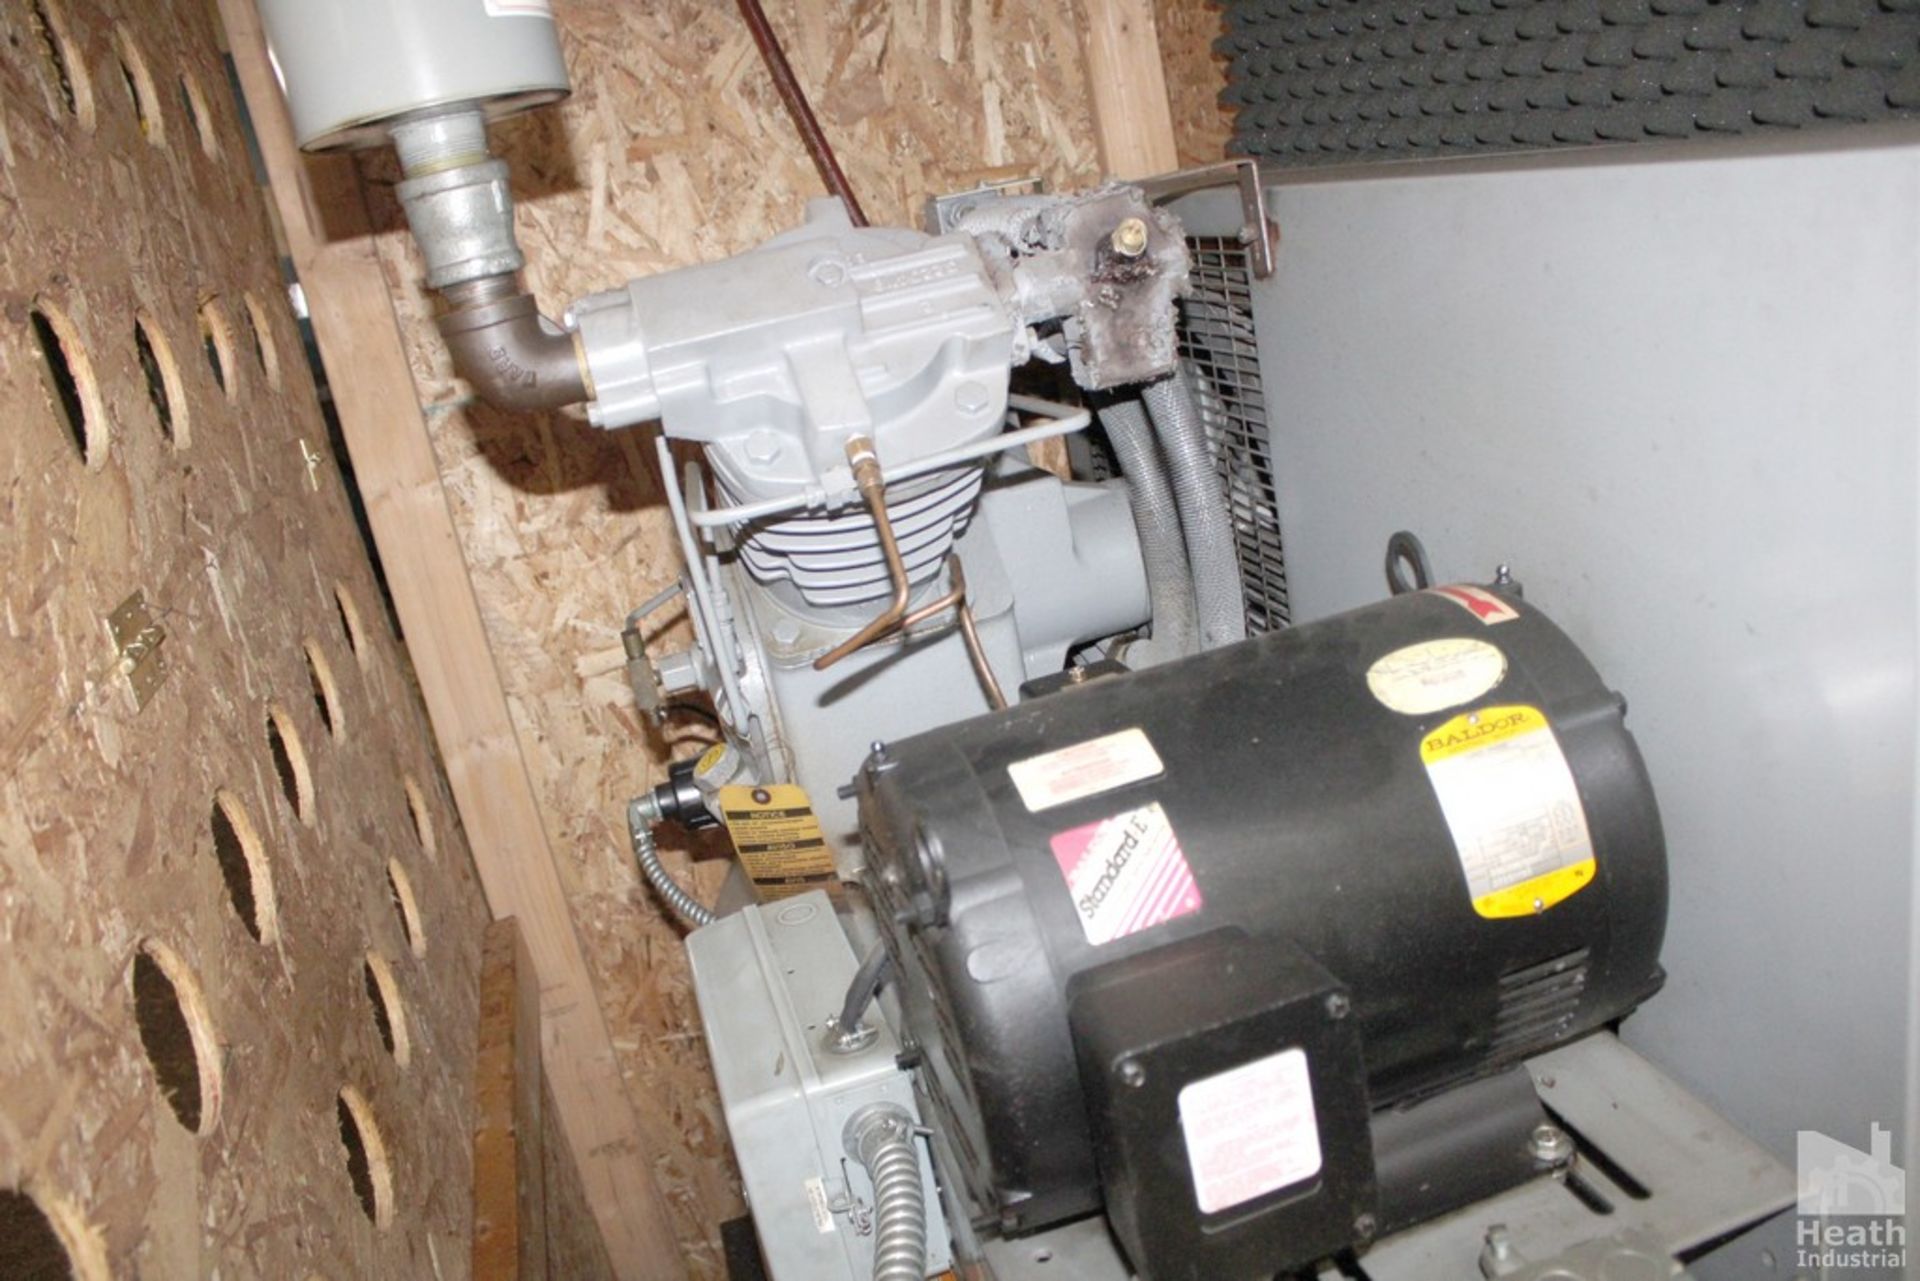 INGERSOLL RAND 10 HP MODEL 2545E10 2 STAGE TANK MOUNTED AIR COMPRESSOR, S/N 30T922771 - Image 2 of 3